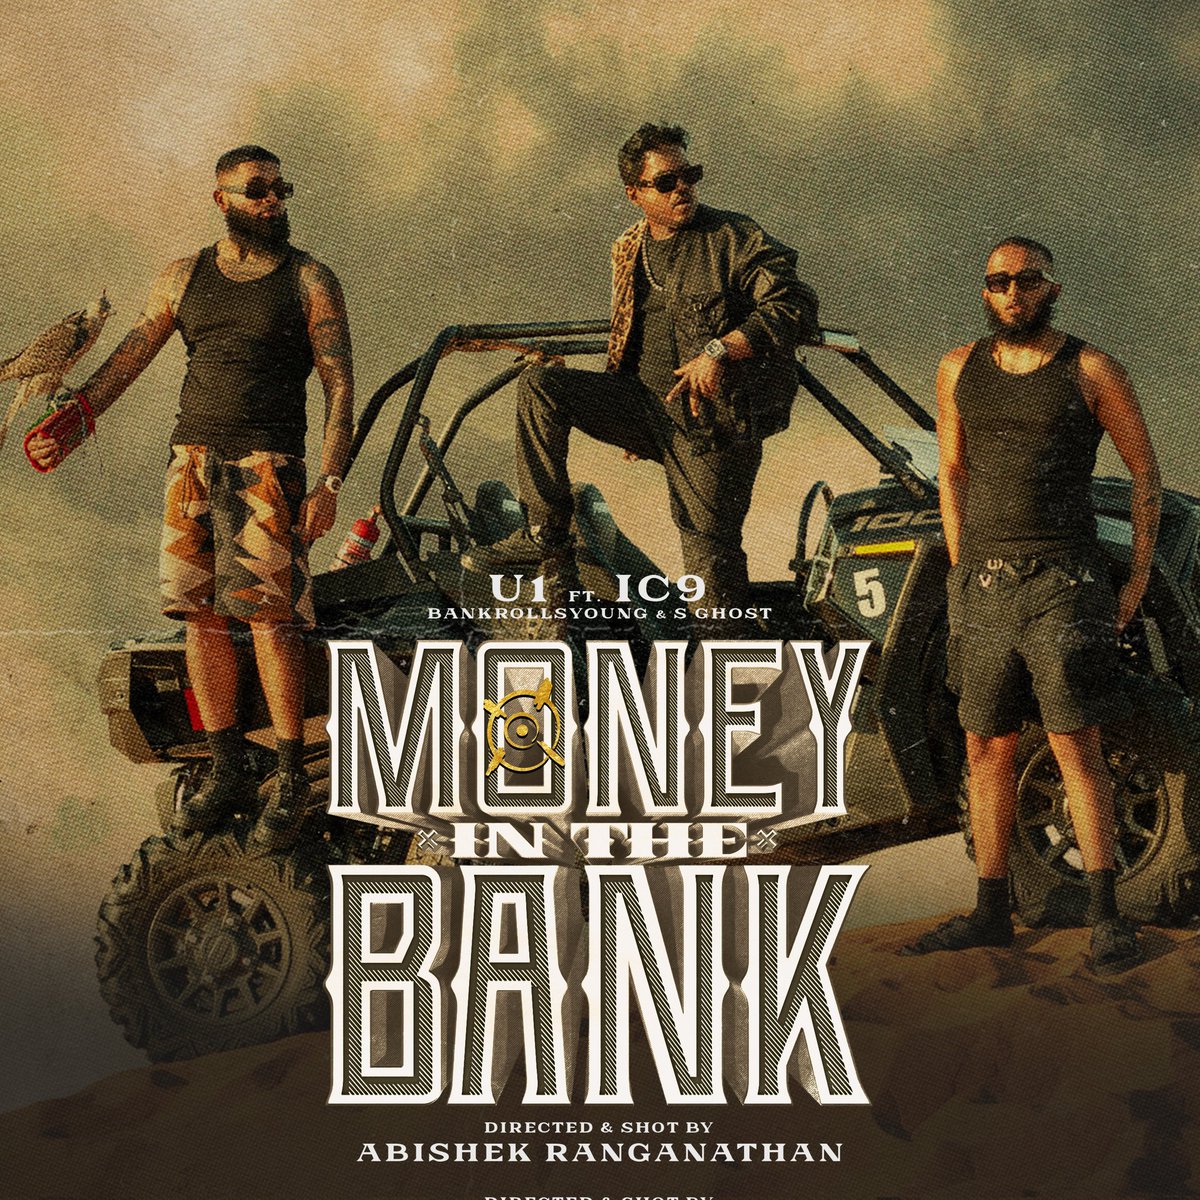 Yuvan Shankar Raja's 'Money In The Bank' - Independent music video is out now..

youtu.be/41W7sRc5wps?si…
@thisisysr @u1records

 #IndieRevolution #YuvanMagic #Yuvan #IndependentSong